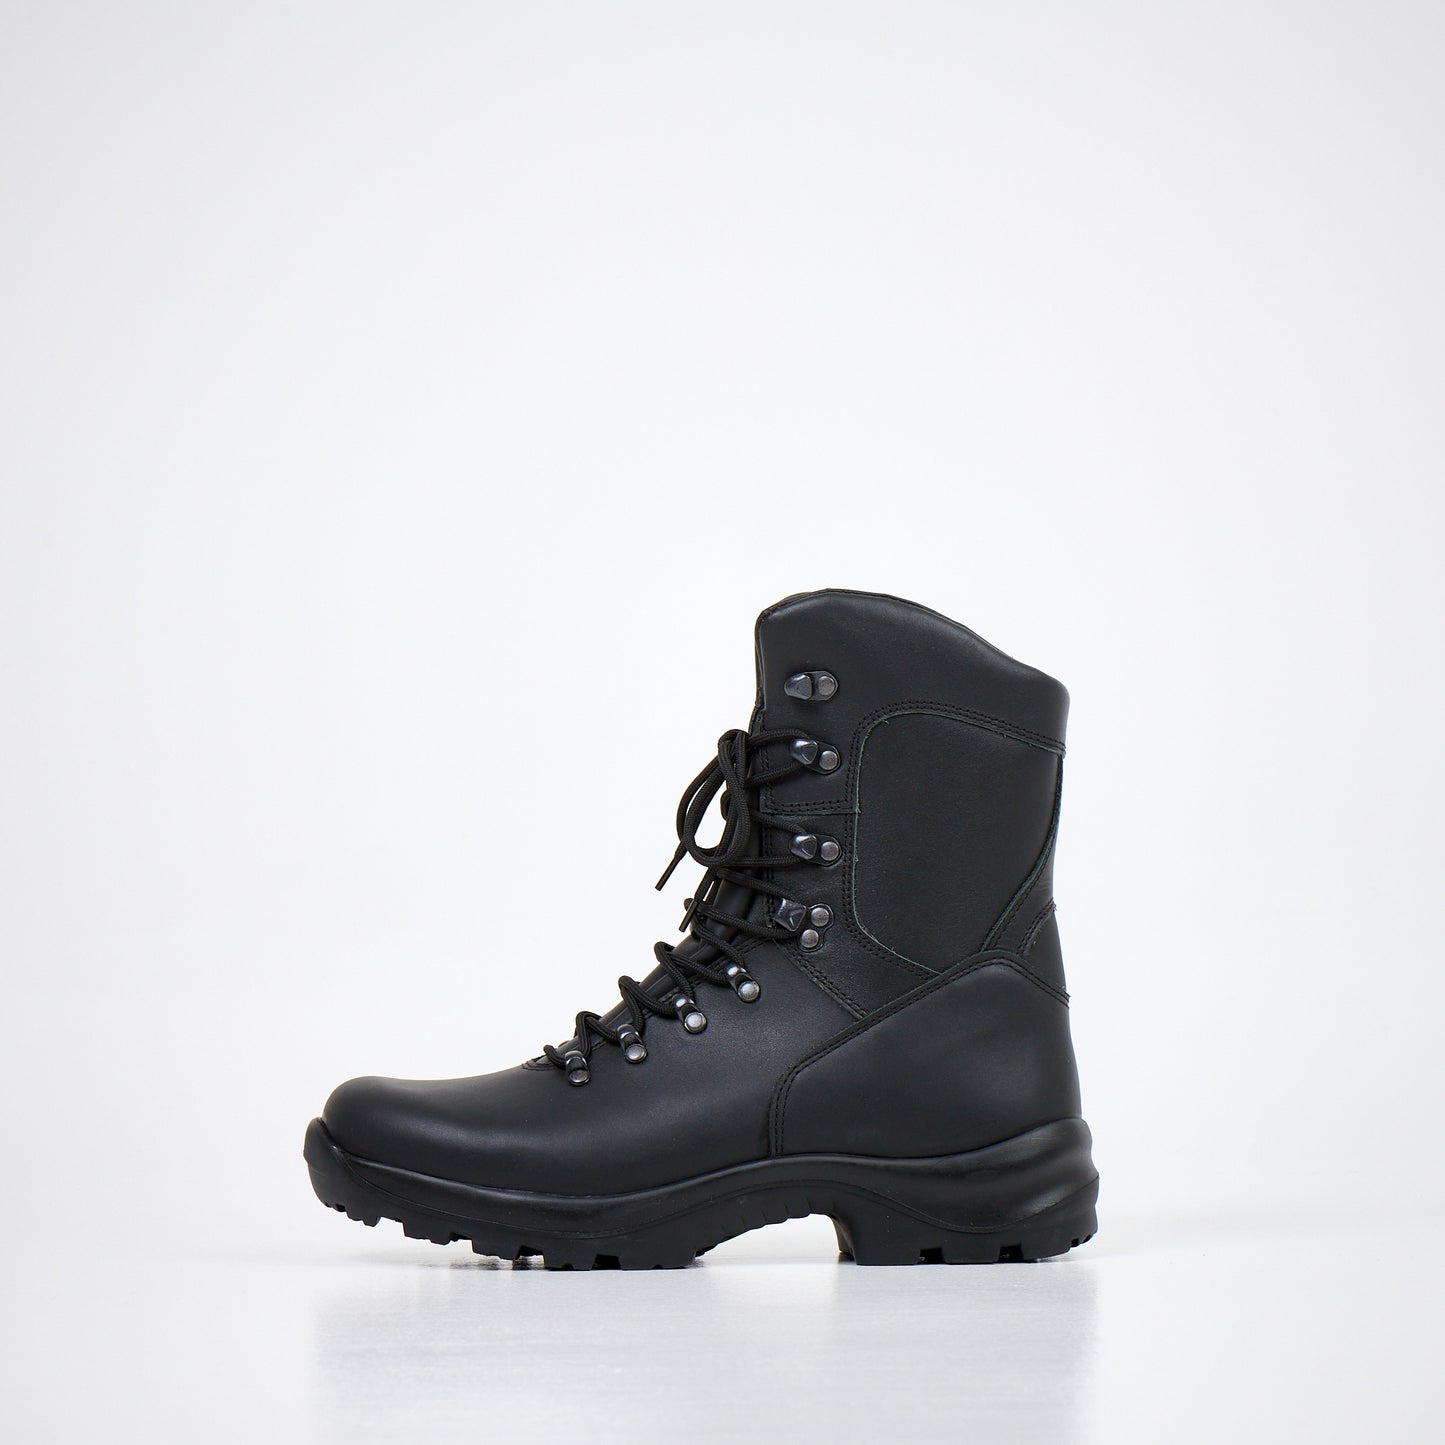 Military Boots 739 - Black